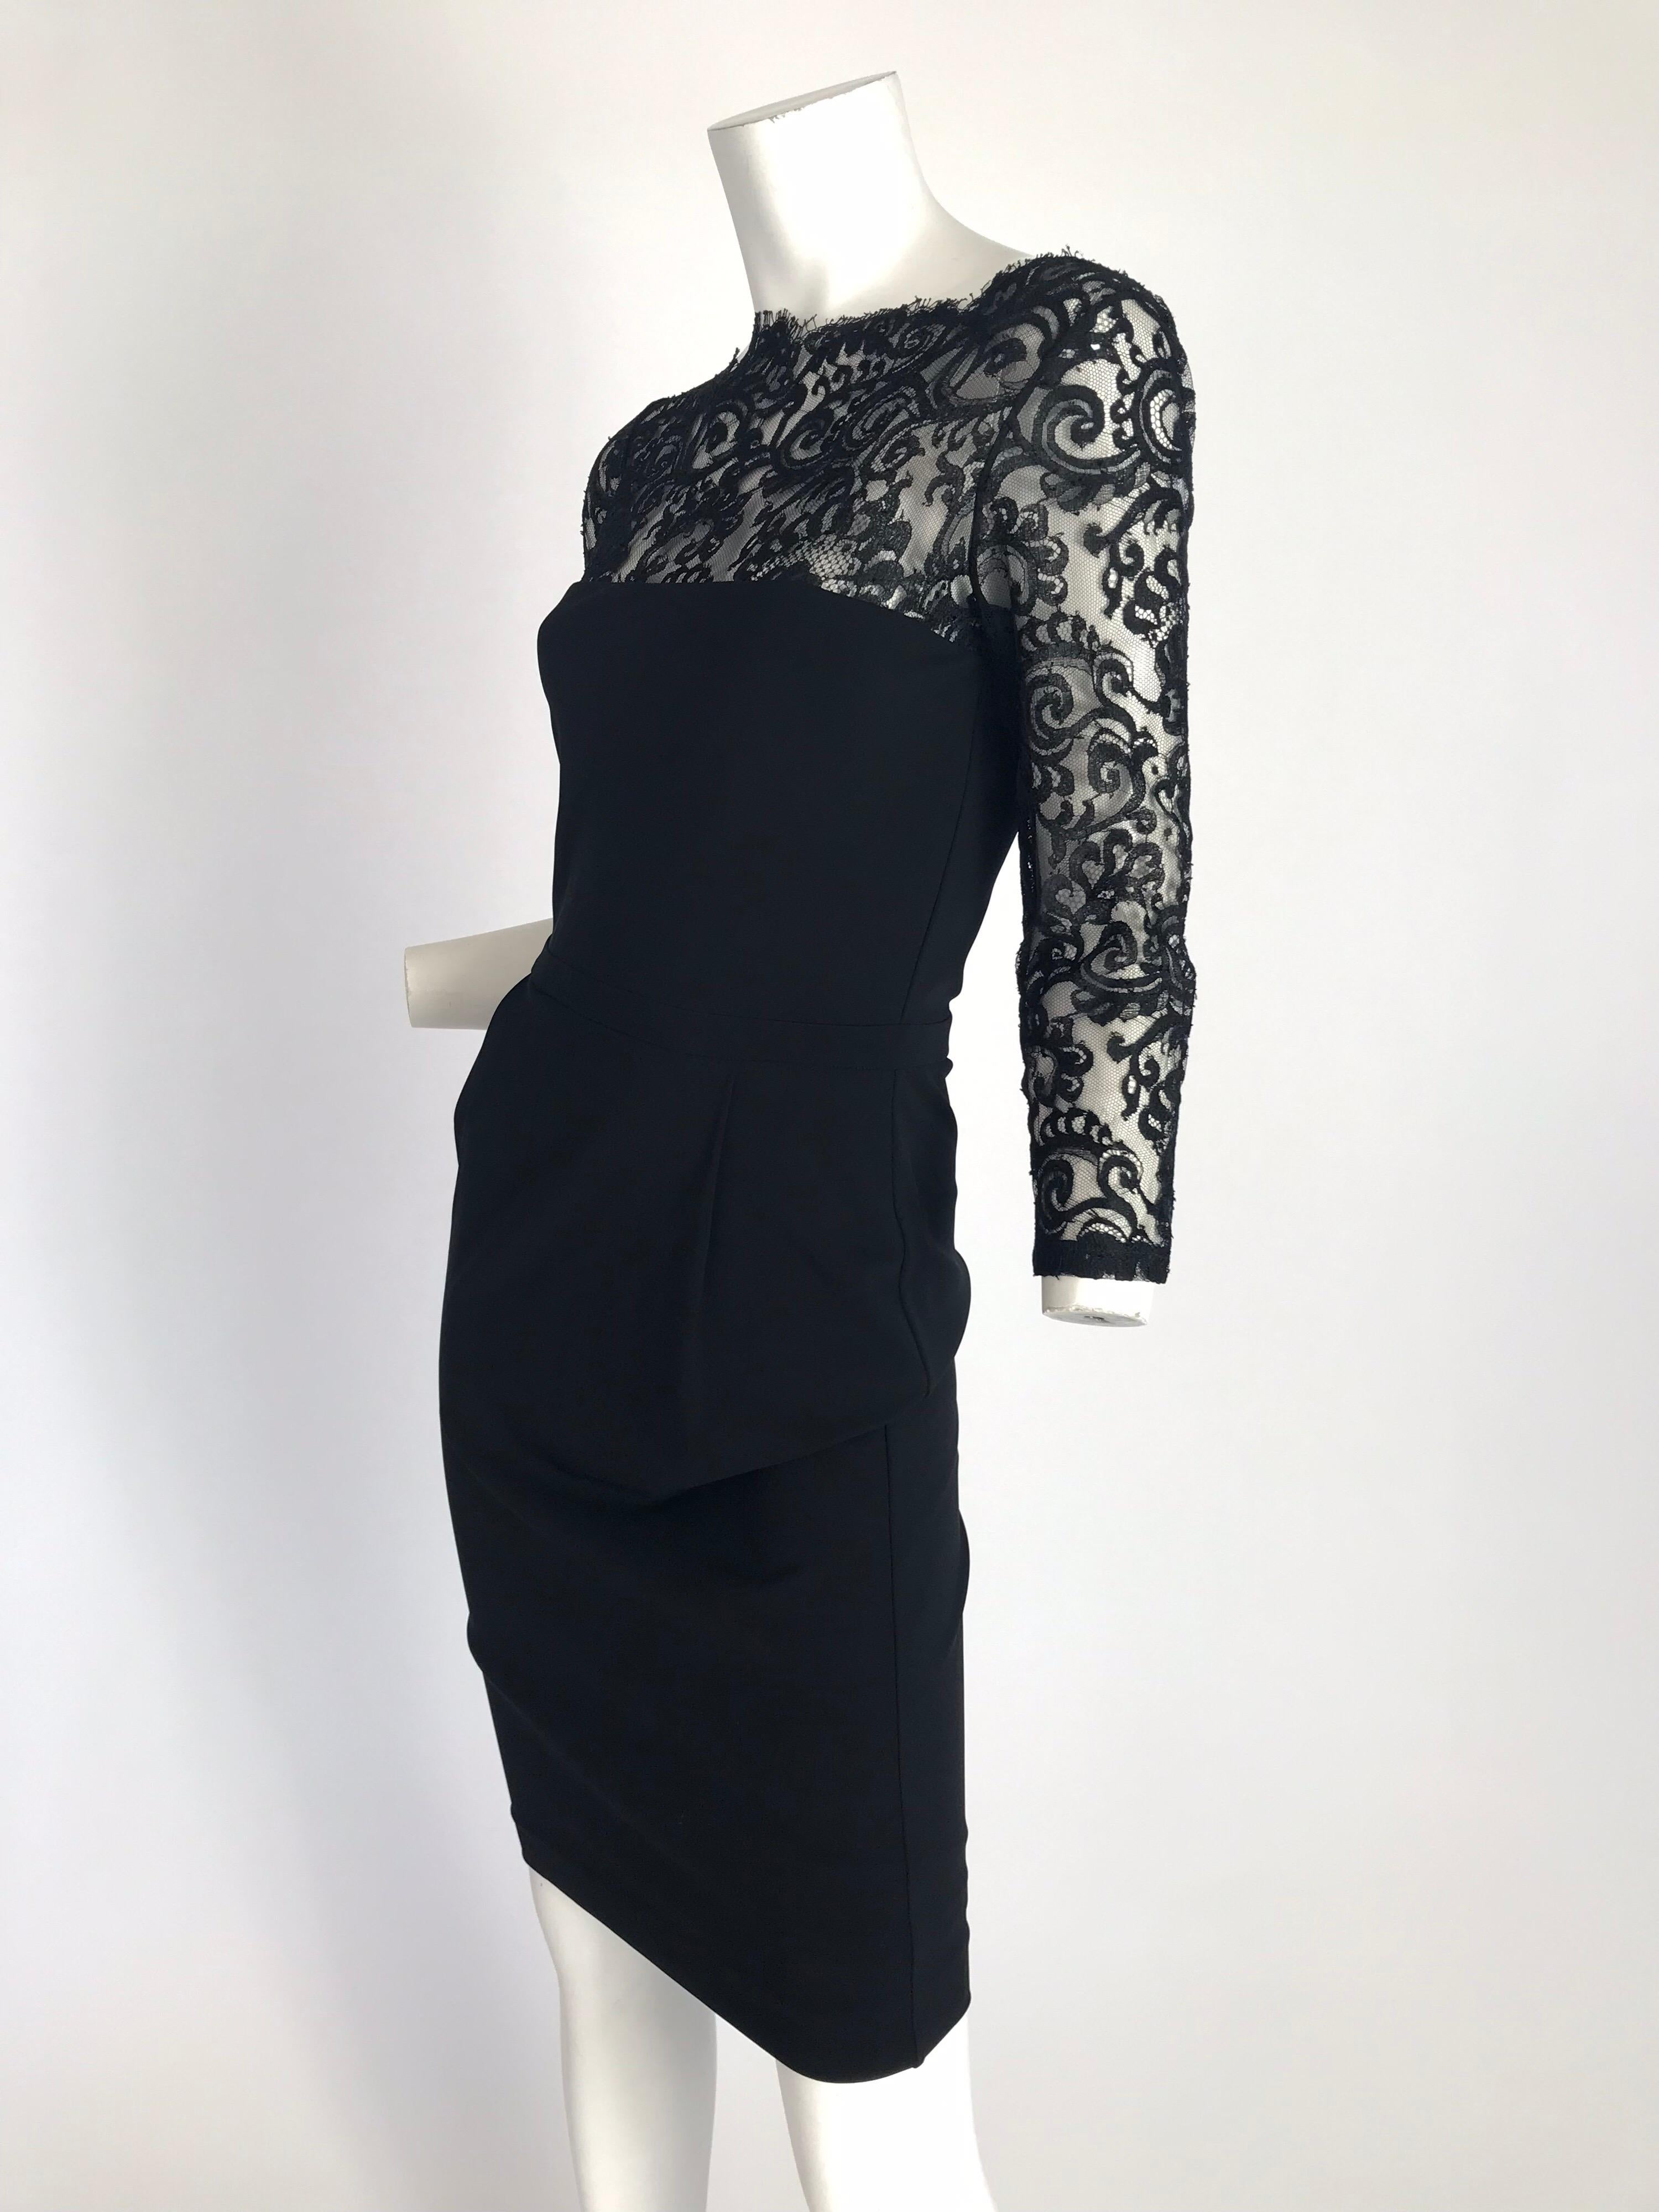 Black Gucci by Tom Ford lace long sleeve dress with bateau neck and concealed zip closure at back. Condition: Excellent. Size Small 

Waist: 26